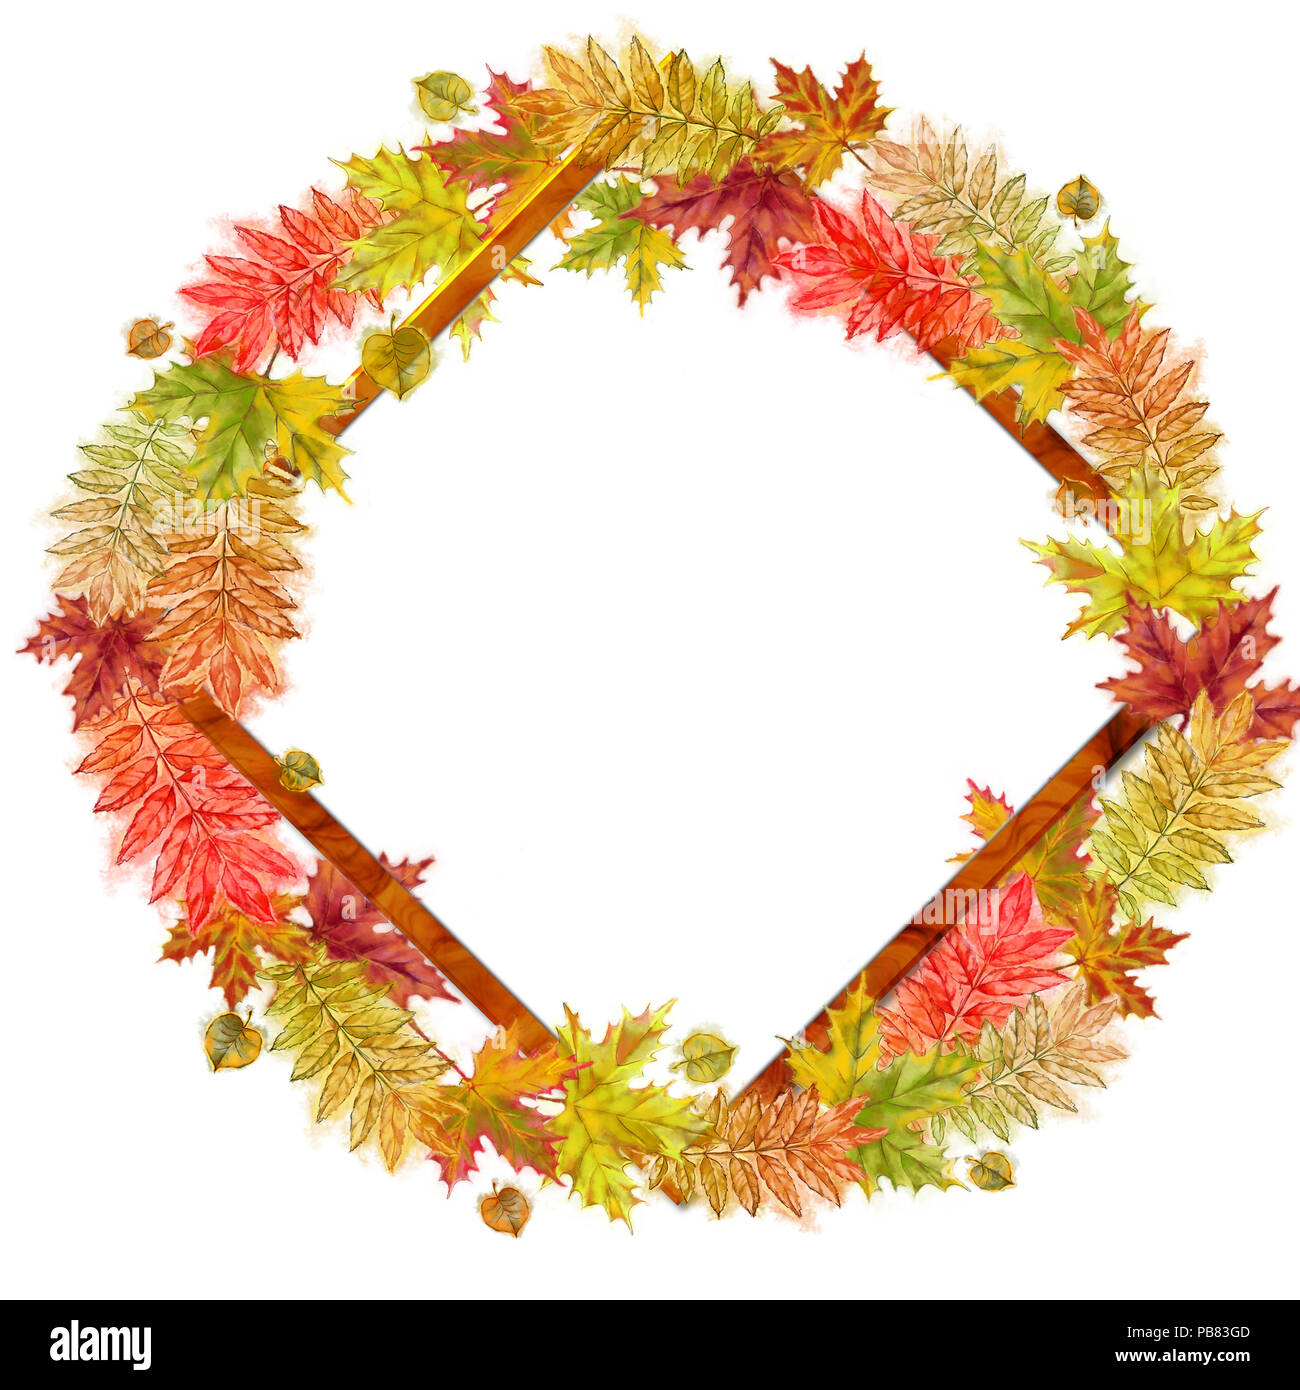 Autumnal Template with Diamond Shaped Frame and a Round Wreath Wrapped Around it. Watercolor Autumn Leaves Design for Print, Announcement, Cards etc. Stock Photo